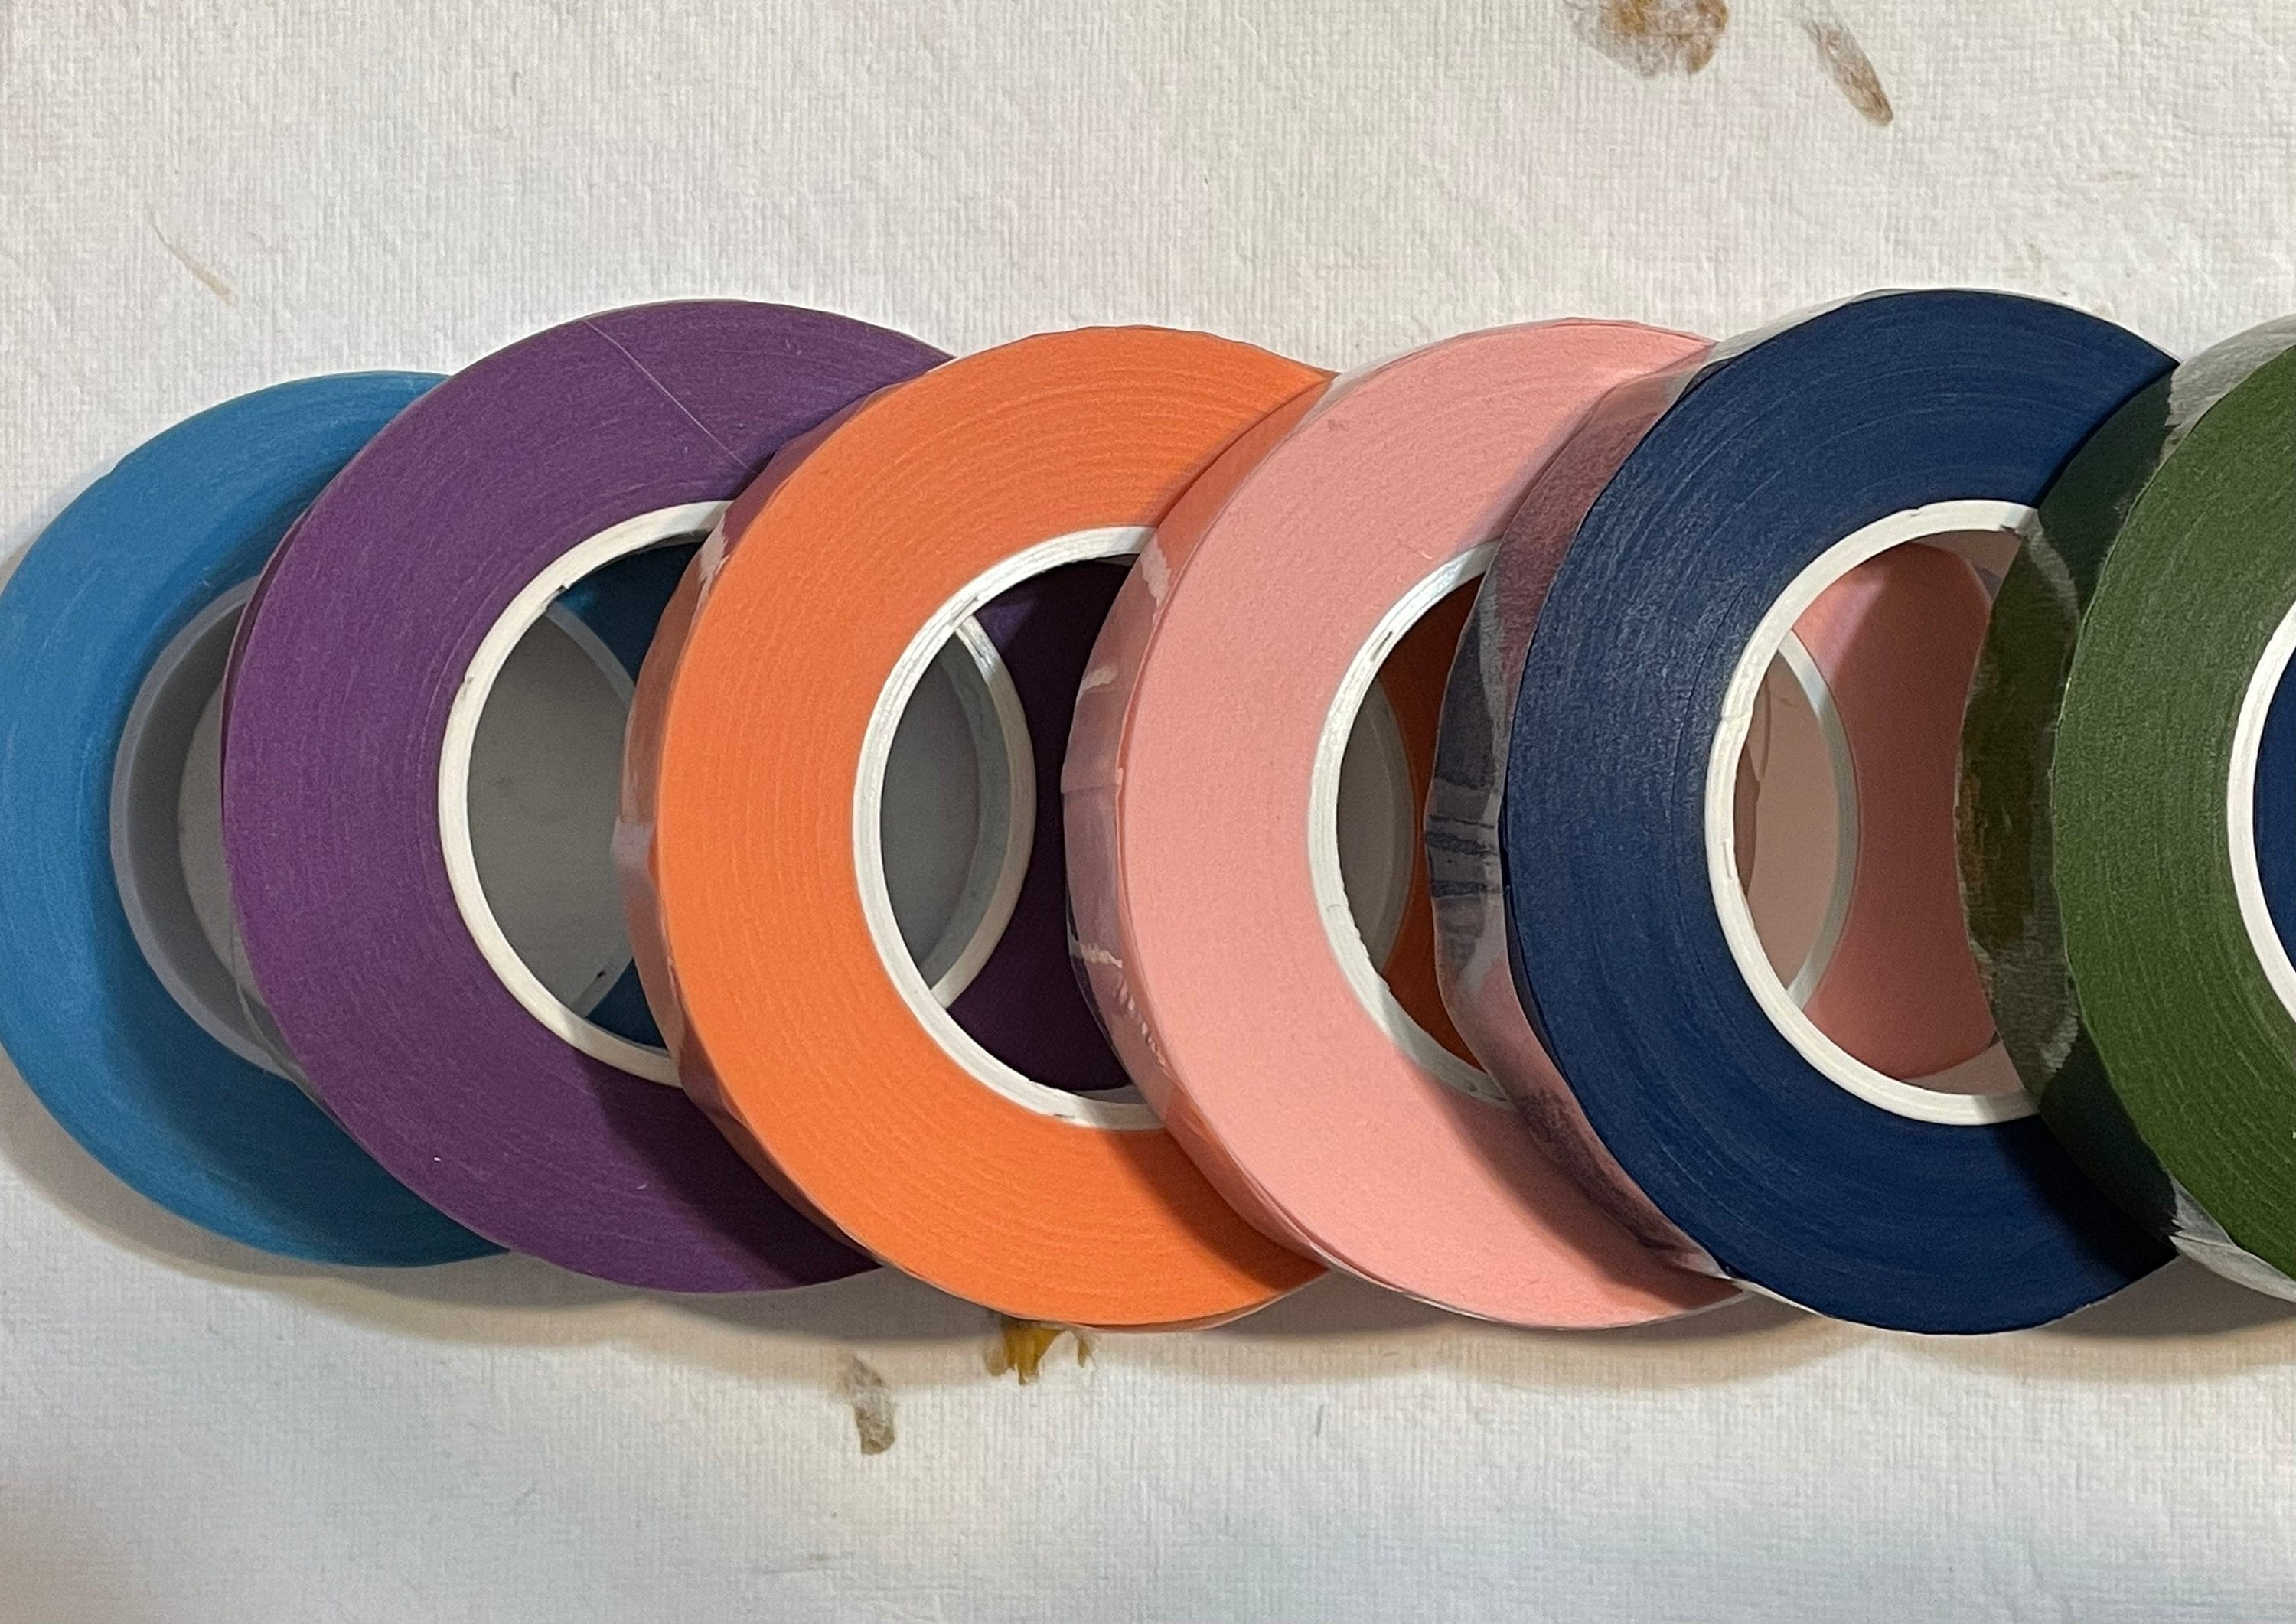 1 Roll of Floral Tape 30 Yards, 27 M/per Roll 22 Colors, Please READ  Description for Available Colors, You Pick the Color 